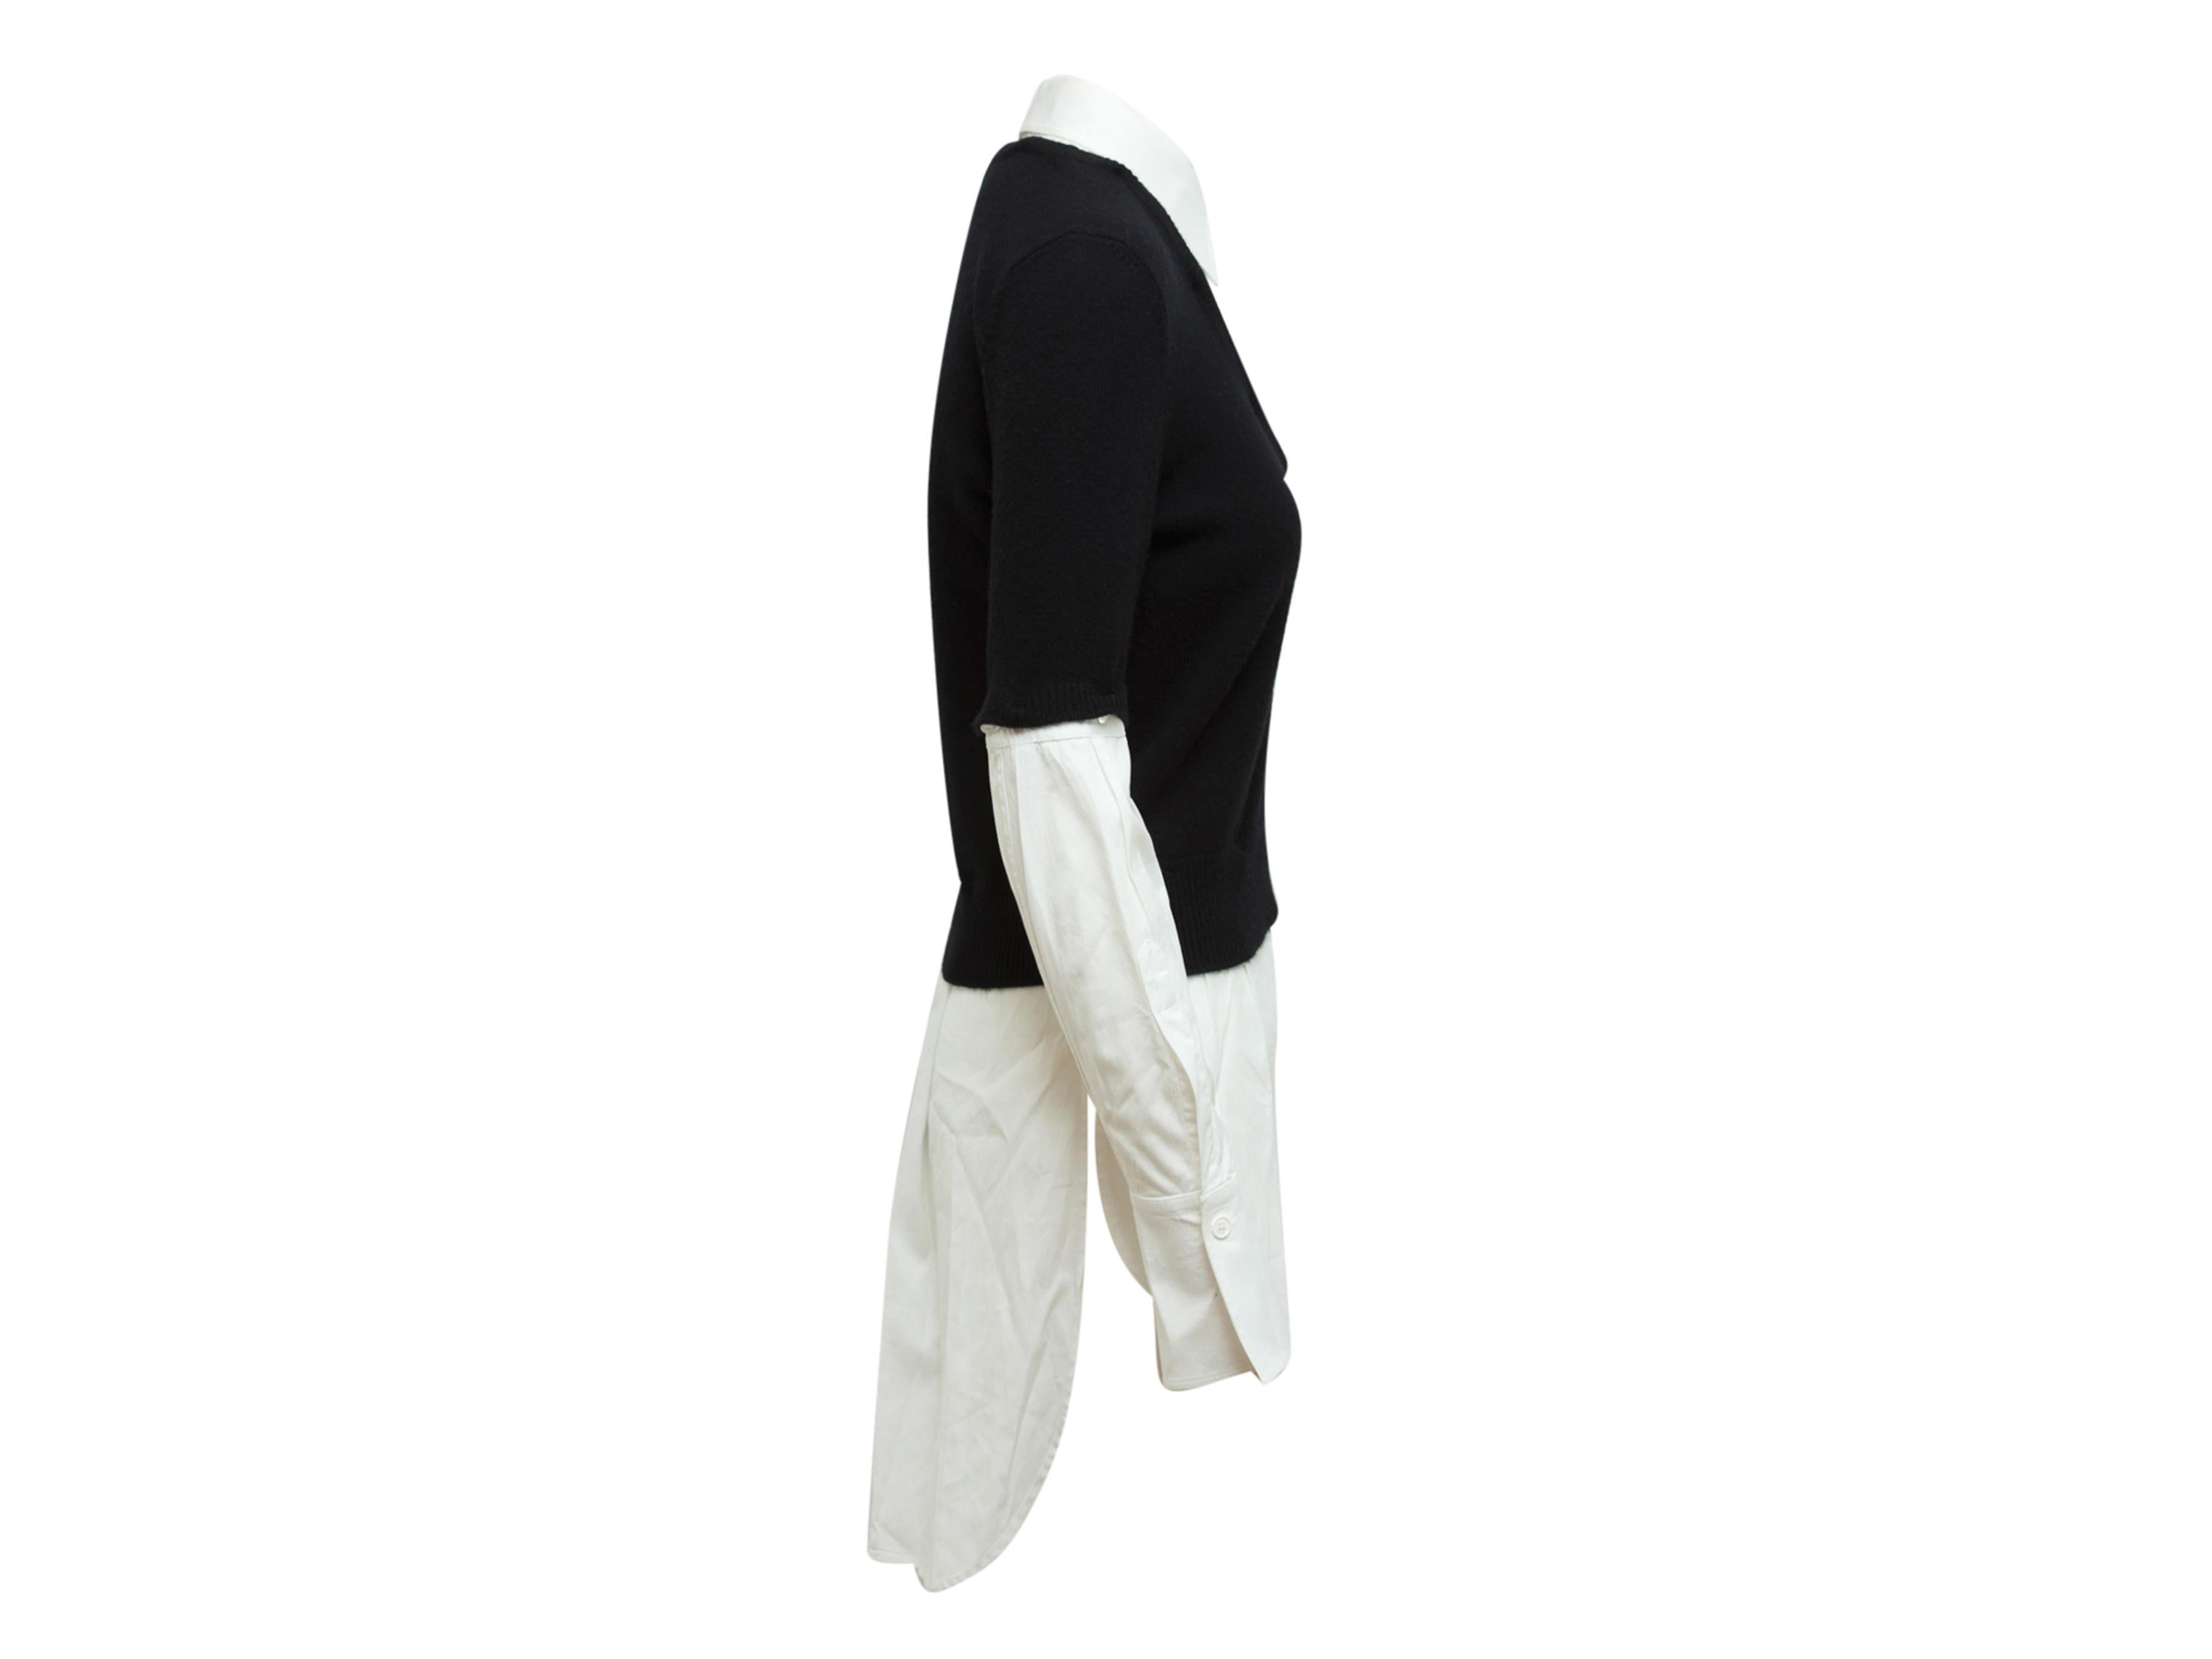 Product details: Black and white layered wool and cashmere sweater by Alexander McQueen. V-neck. Long sleeves. Detachable underlay featuring pointed collar. 38